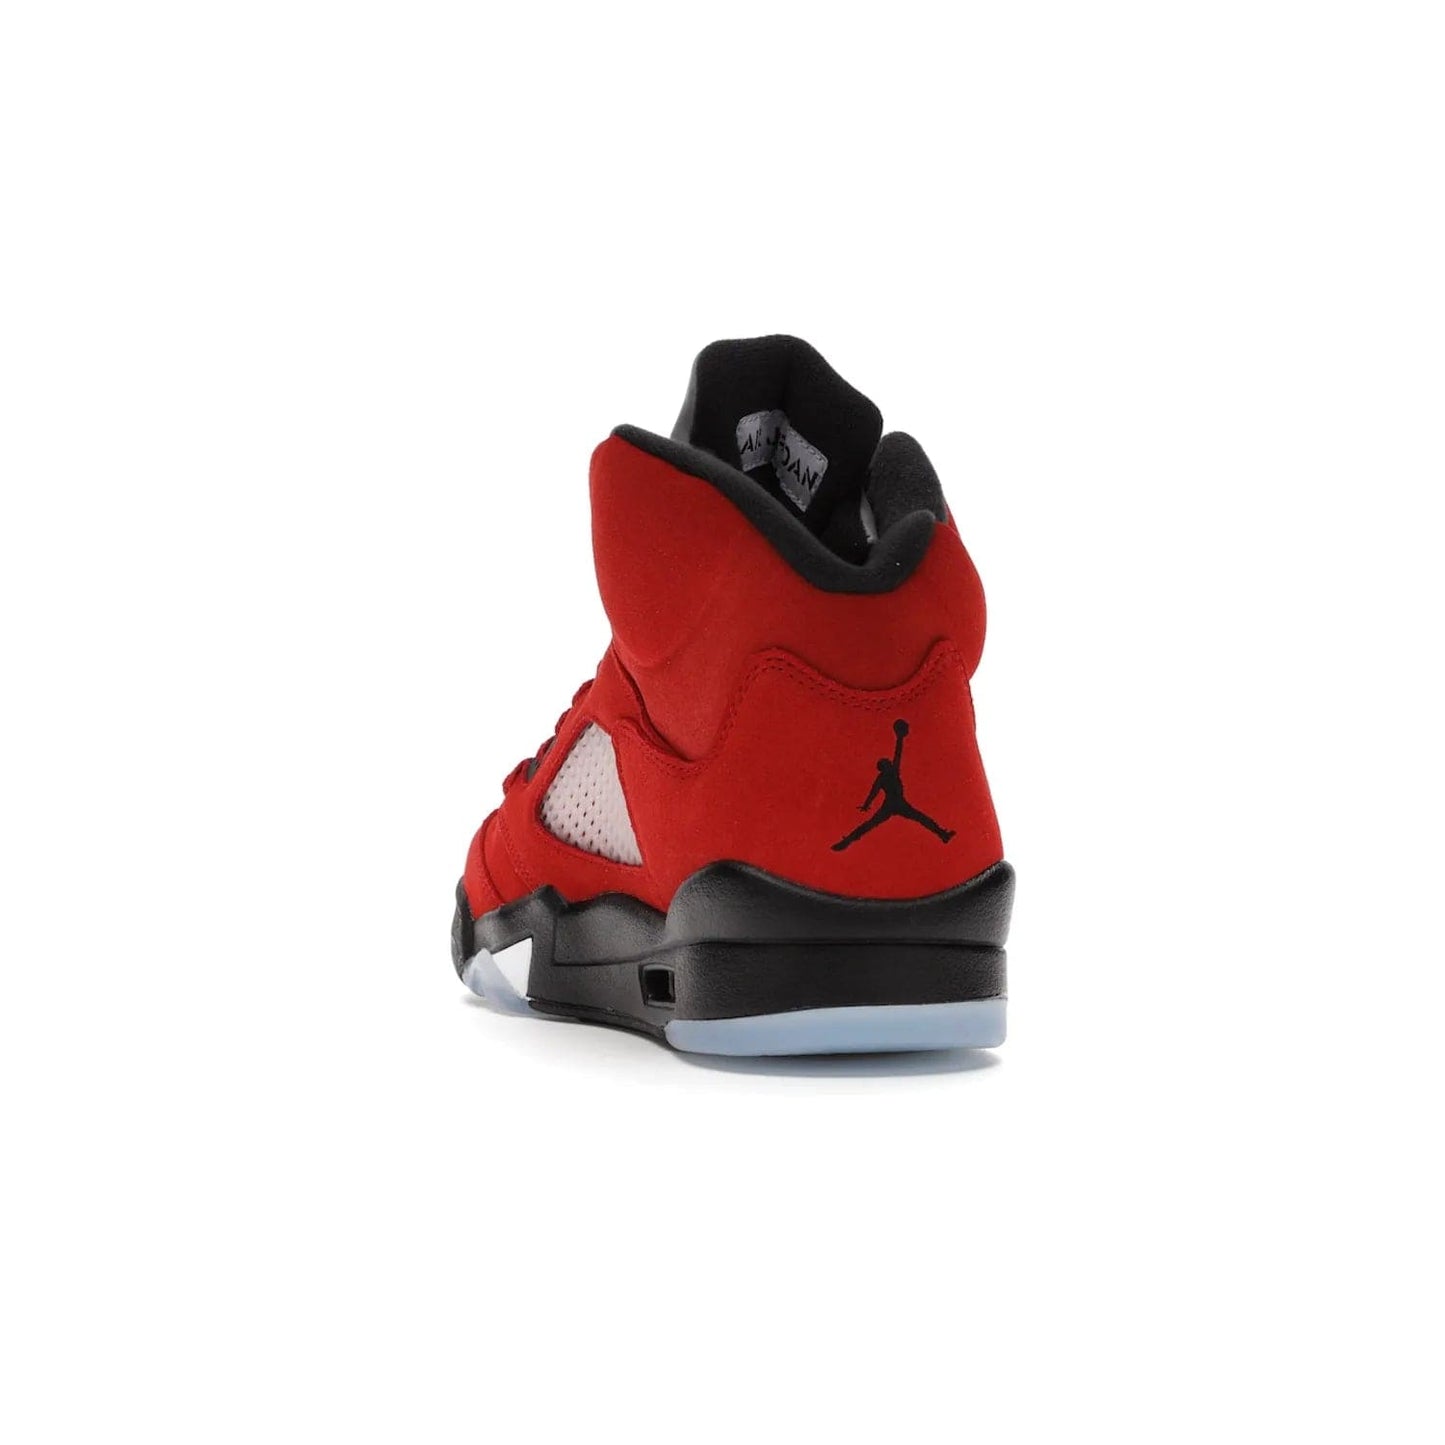 Jordan 5 Retro Raging Bull Red (2021) - Image 26 - Only at www.BallersClubKickz.com - Get ready for the 2021 stand-alone release of the Air Jordan 5 Raging Bulls! This all-suede upper combines luxe details like a Jumpman logo, red & black "23" embroidery and shark tooth detailing, atop a black midsole. Don't miss out - release date in April 2021 for $190.